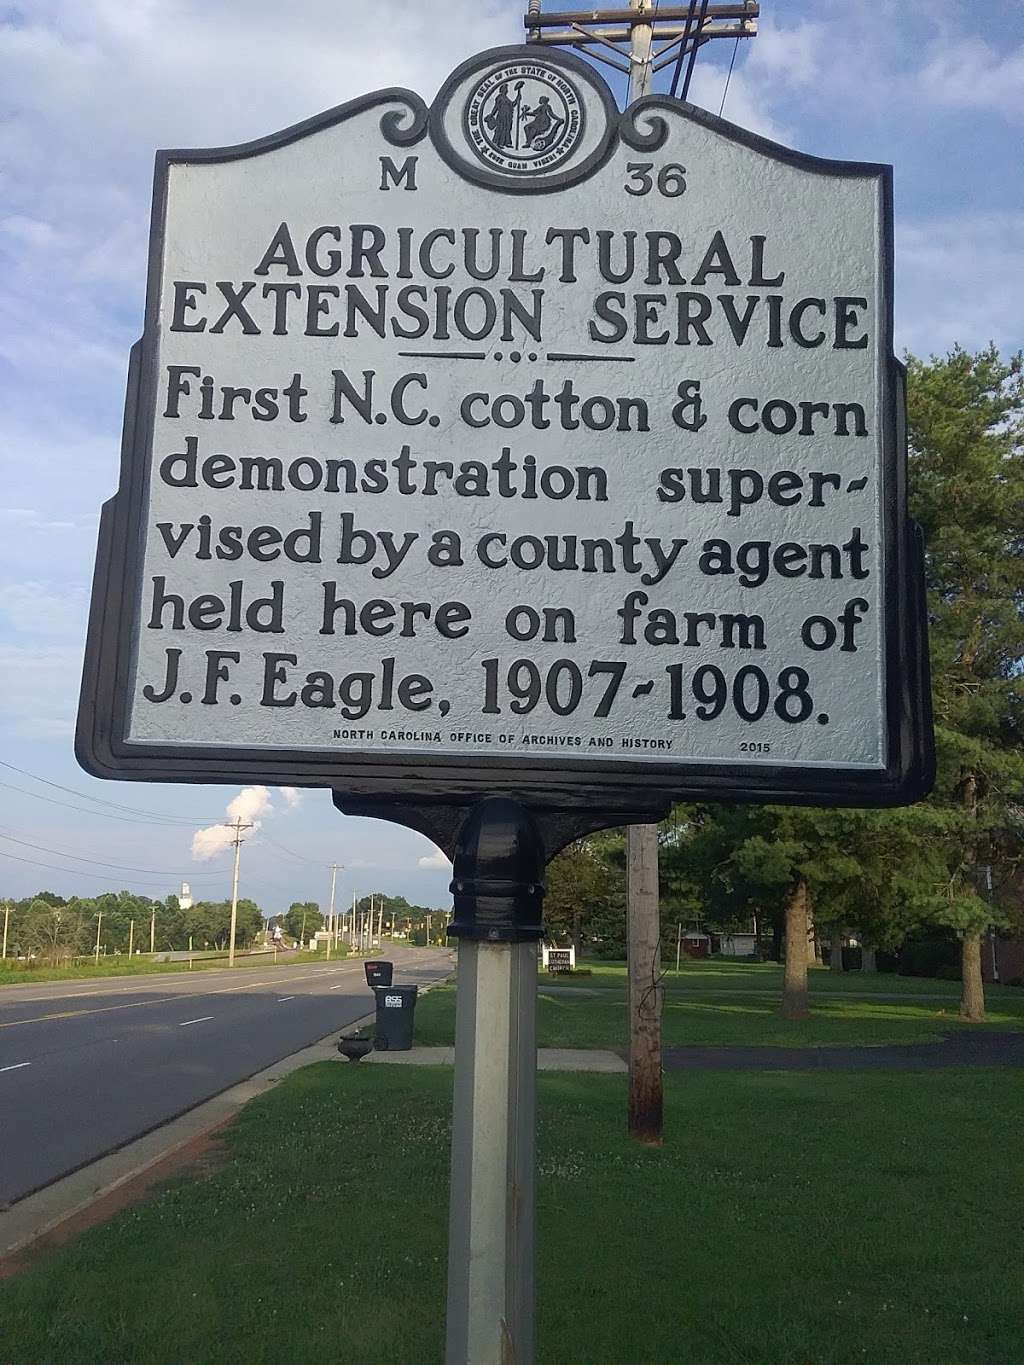 Agricultural Extension Service historic marker | Keller Rd, Statesville, NC 28677, USA